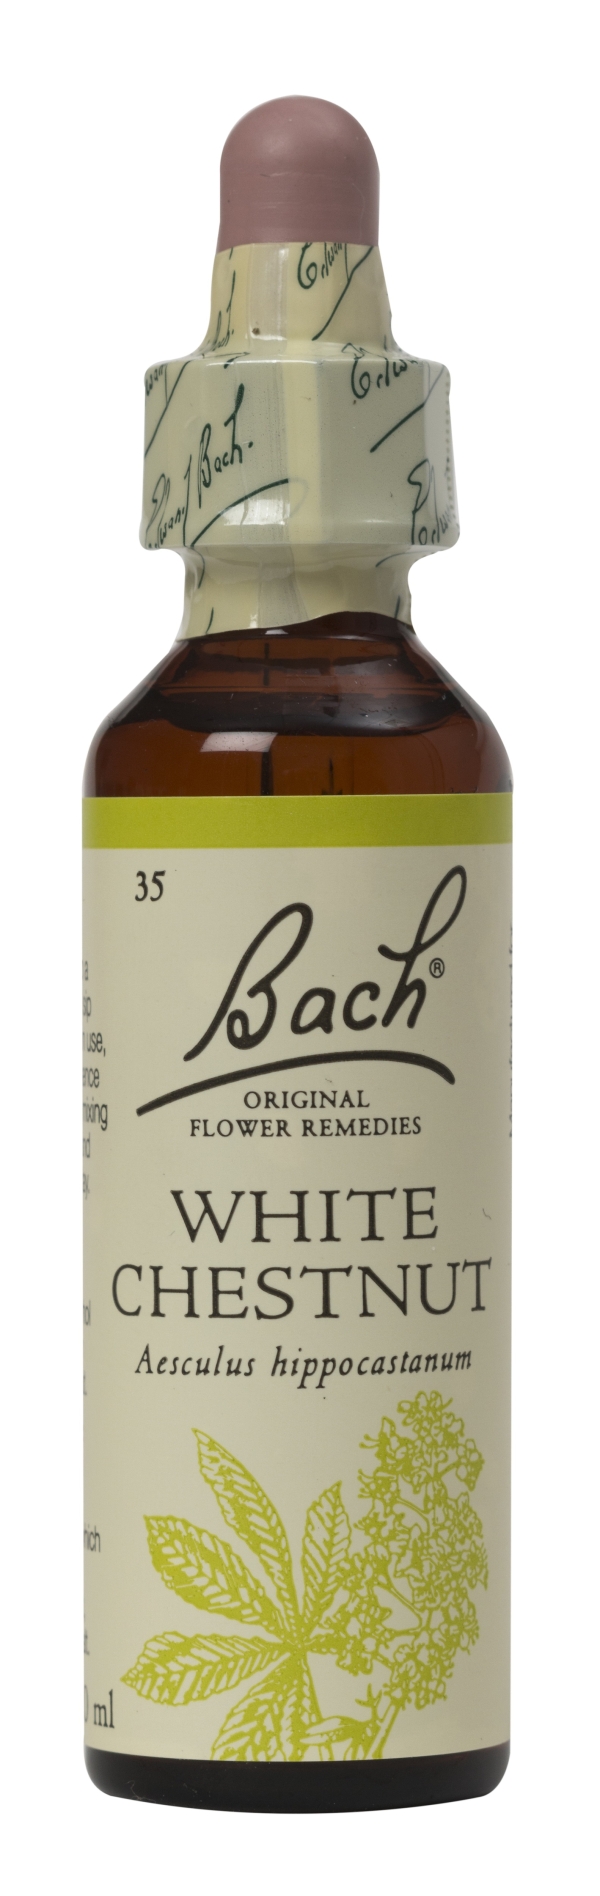 Nelson Bach Flower Remedies: Bach White Chestnut Flower Remedy (20ml) available online here